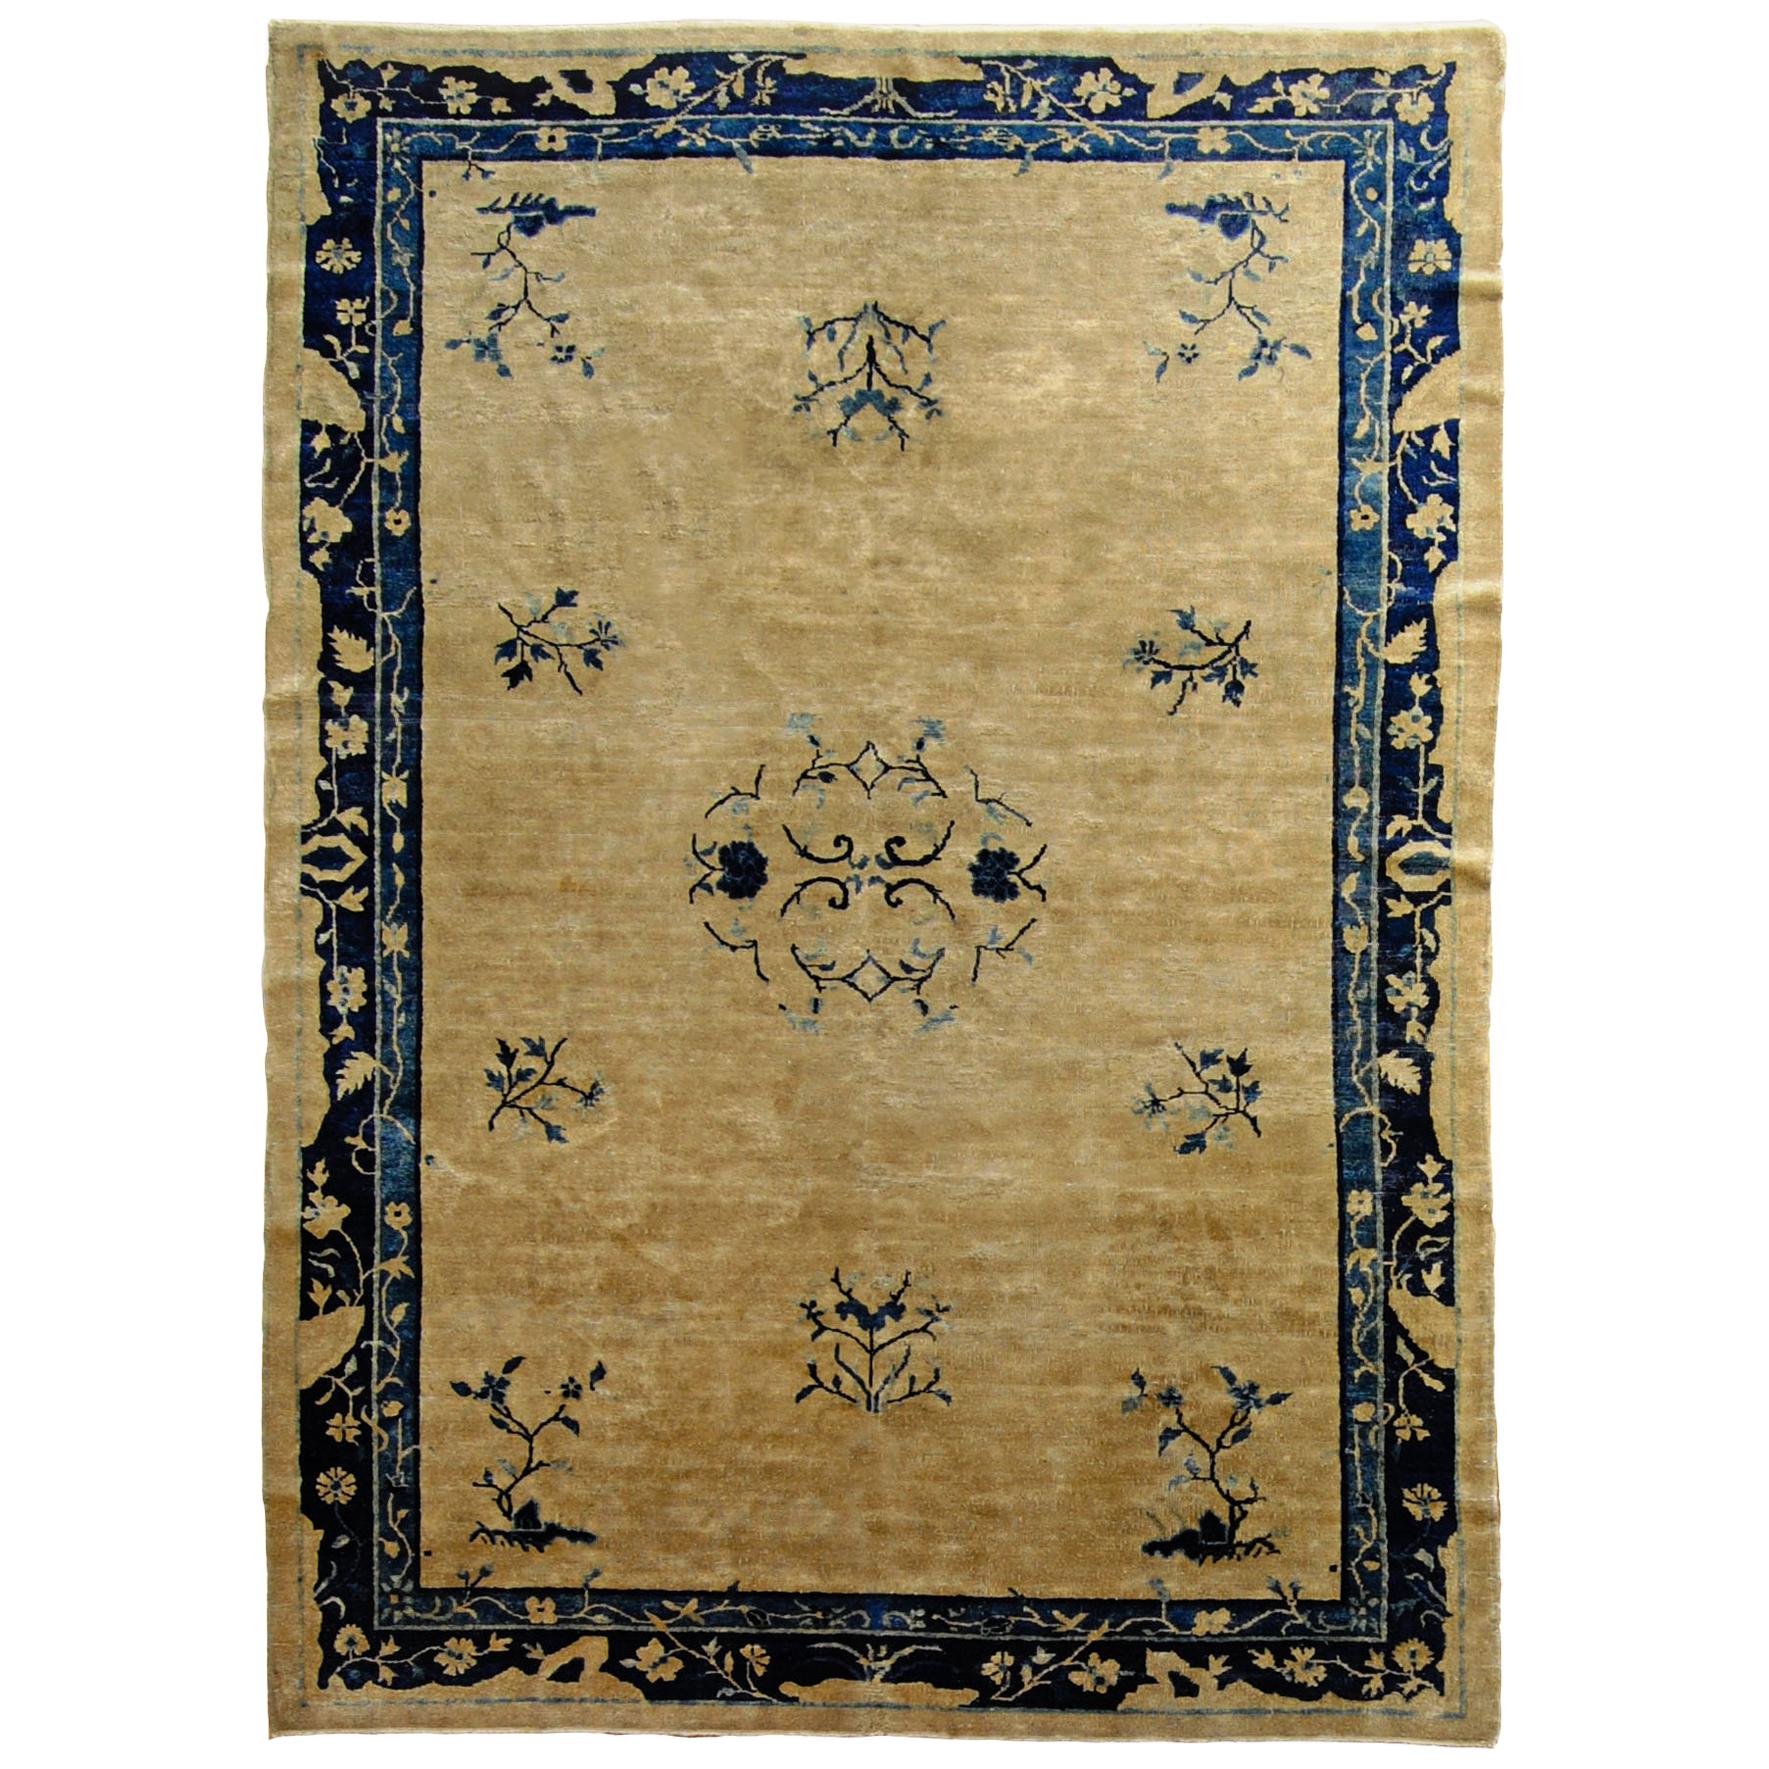 19th Century Peking Hand-Knotted White and Blu Luxury Decoration Rug